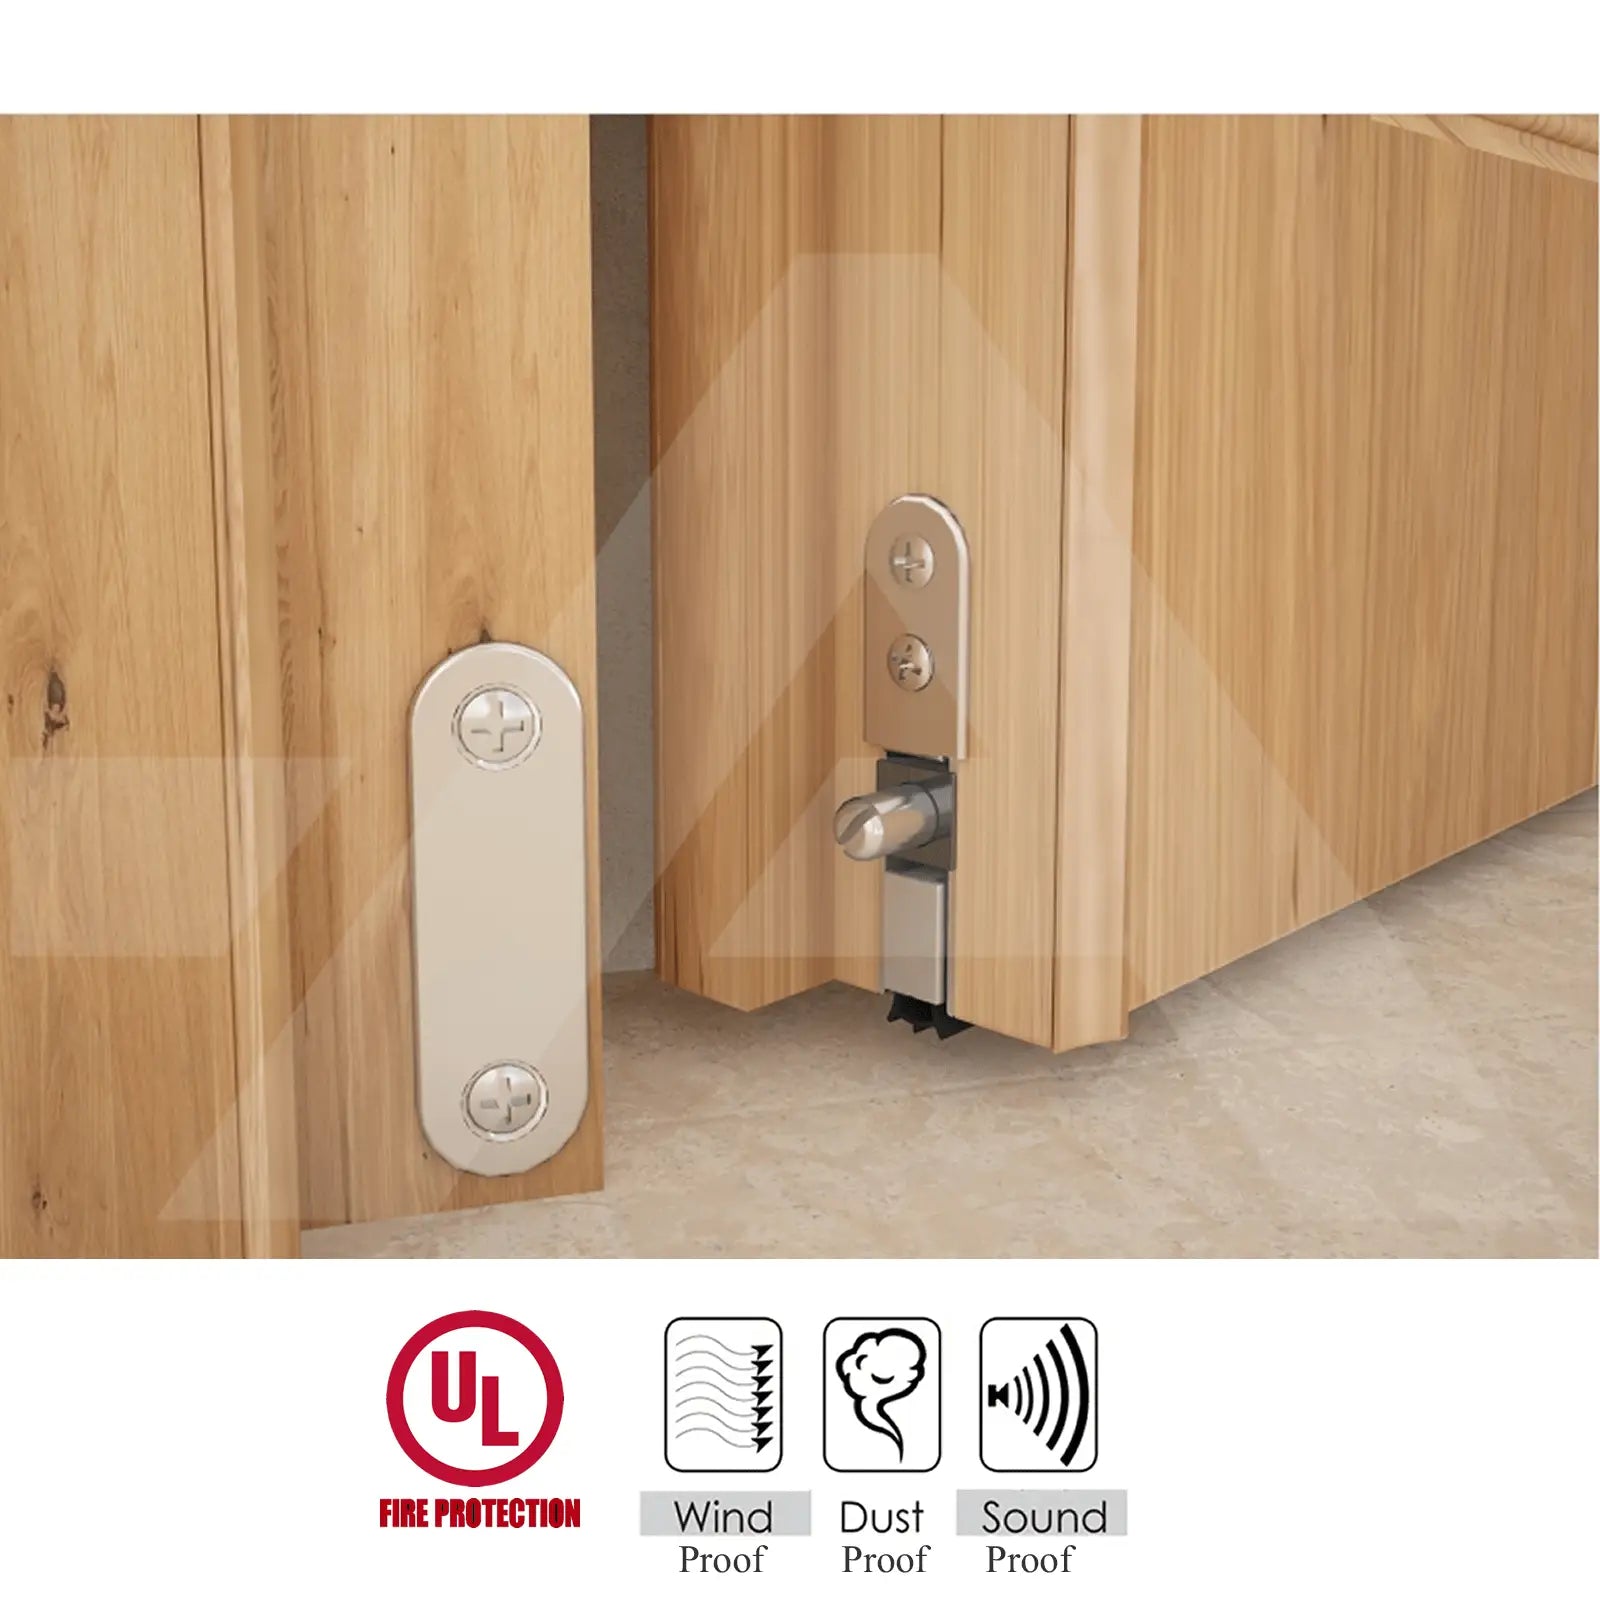 Automatic Drop Down Recessed Door Bottom Seal Fire Sound Dust Wind Proof - Decor And Decor